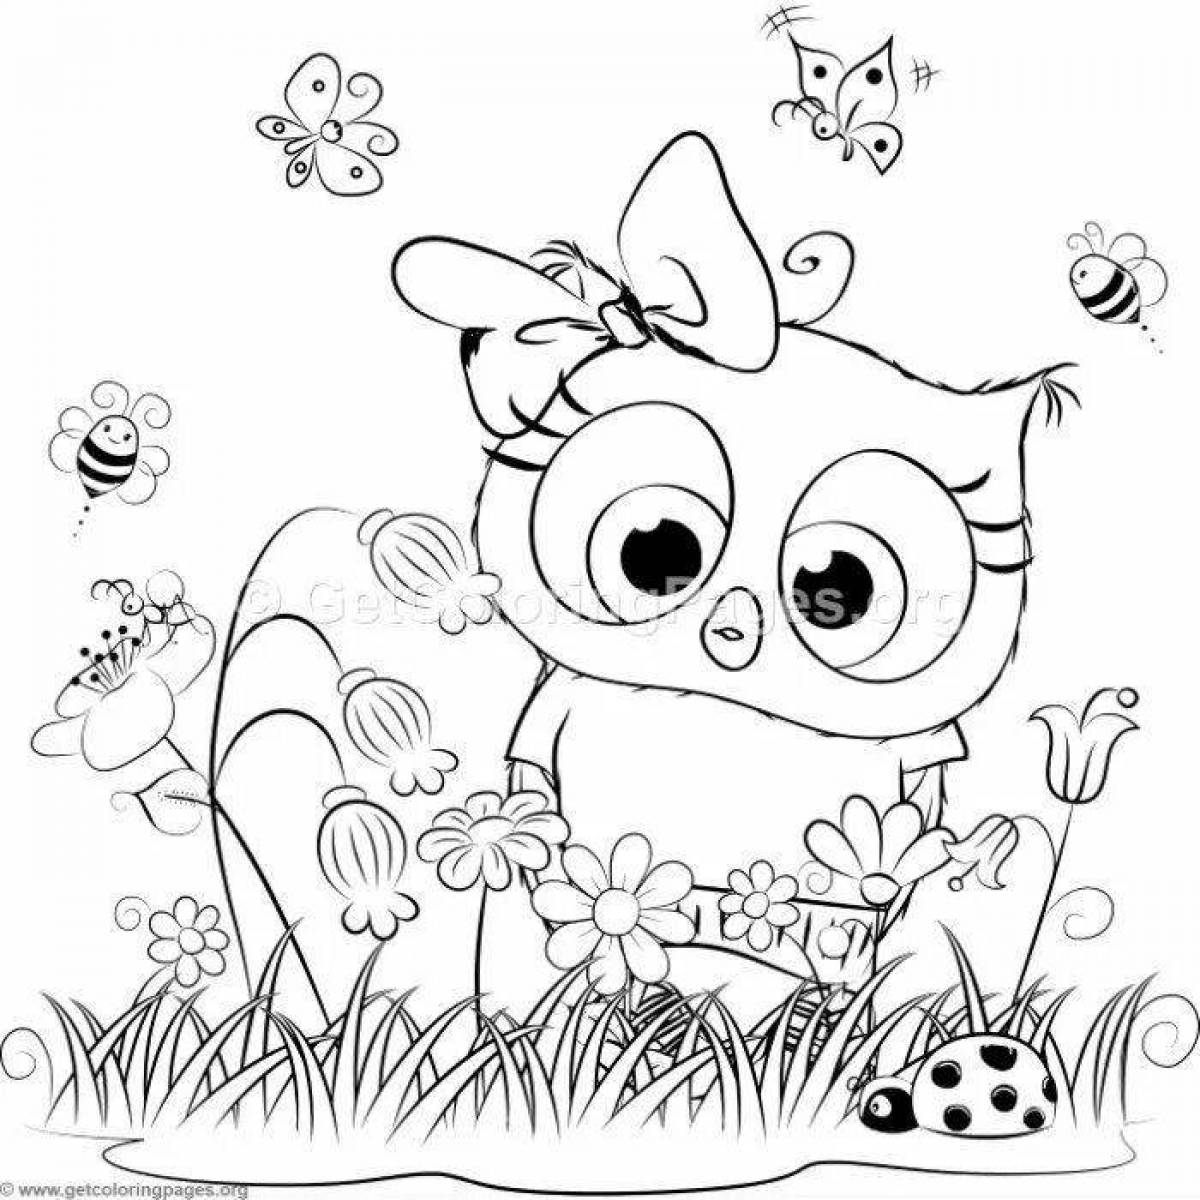 Hip-hop trendy owlet coloring page